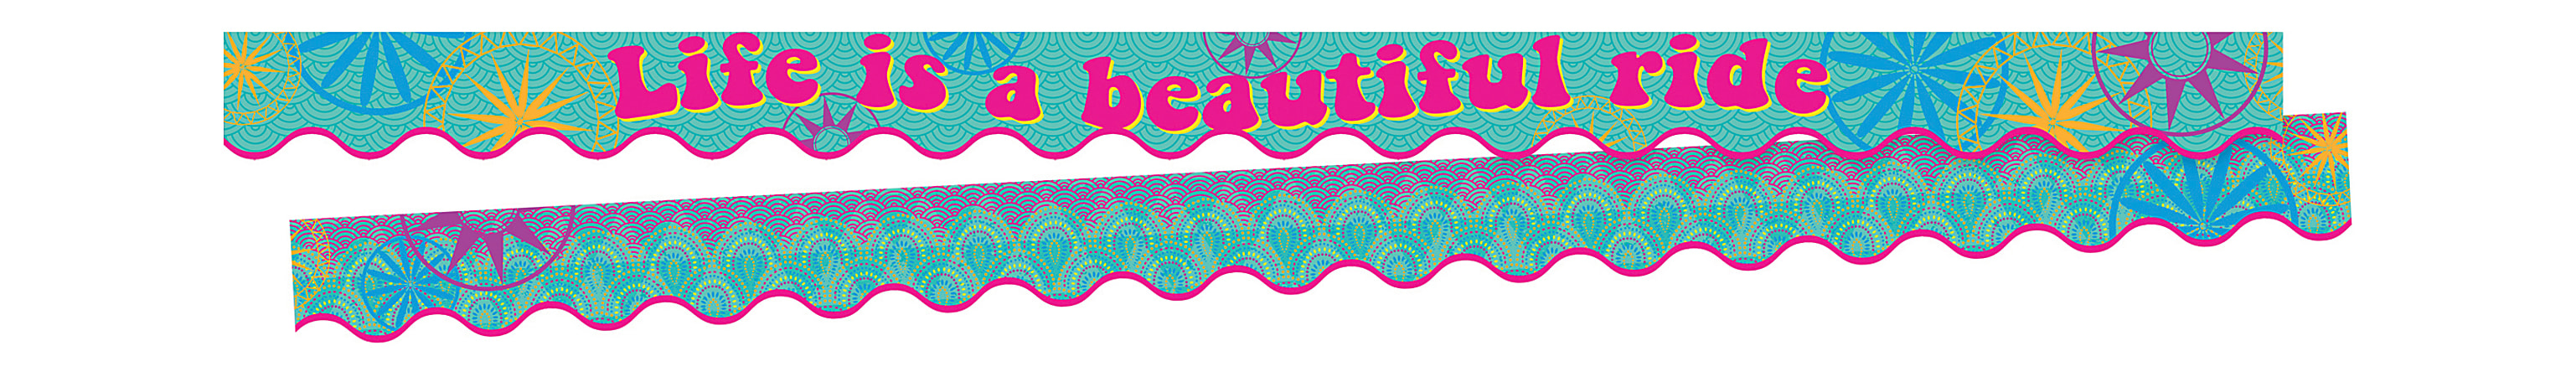 Barker Creek Scalloped-Edge Border Strips, 2 1/4" x 36", Life Is Beautiful, Pre-K To College, Pack Of 26